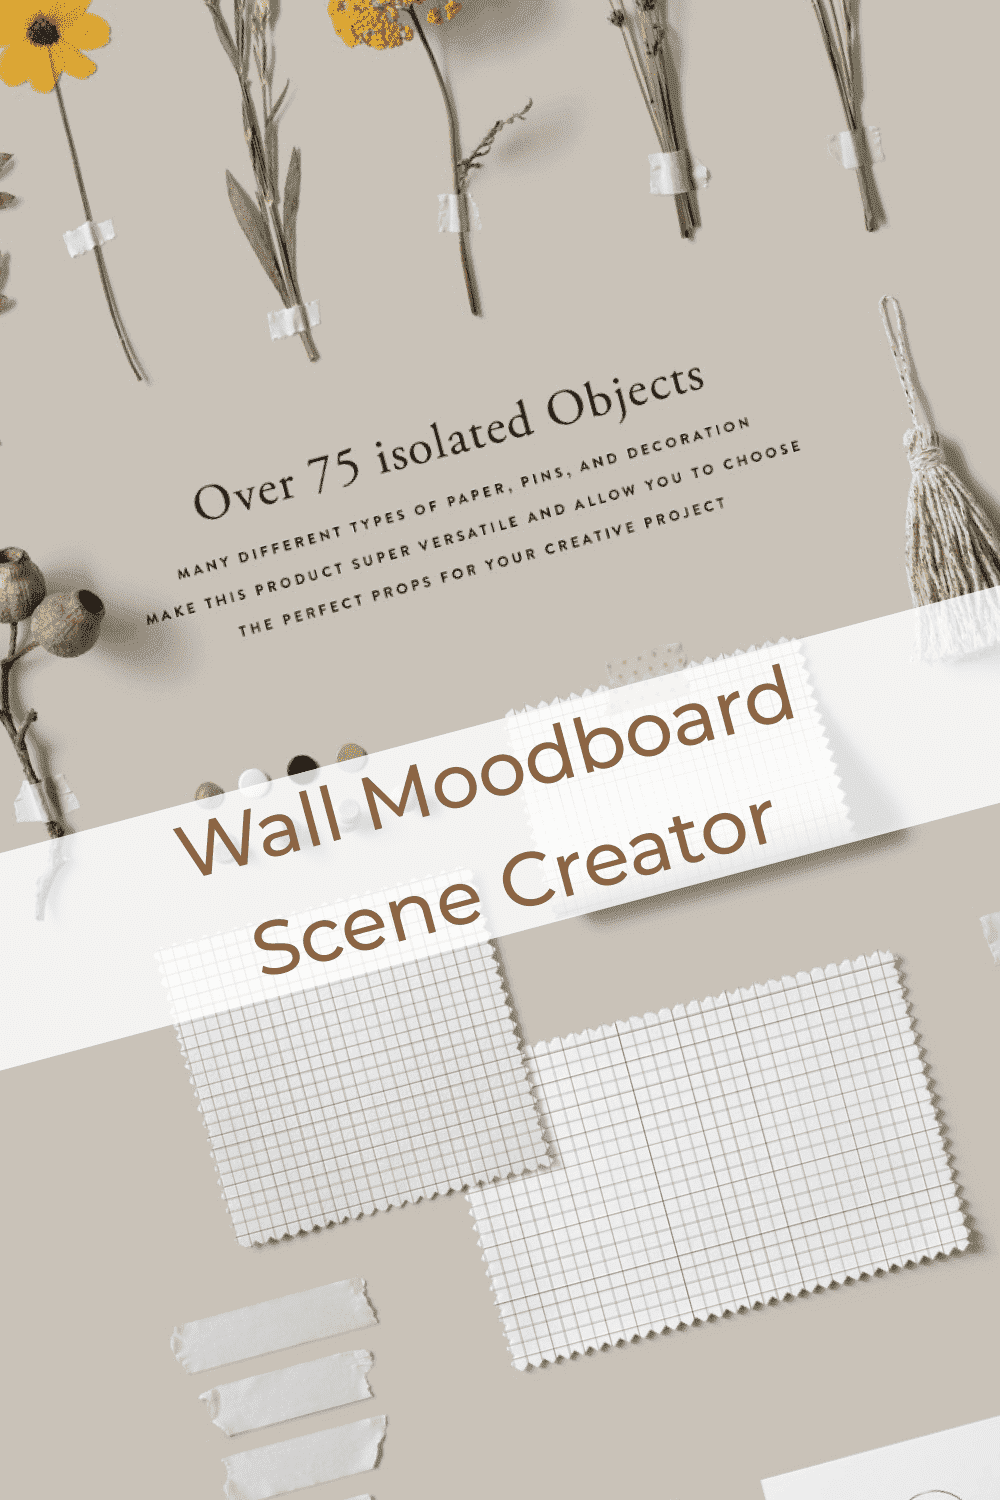 Wall Moodboard Scene Creator - "Choose The Perfect Props For Your Creative Project".